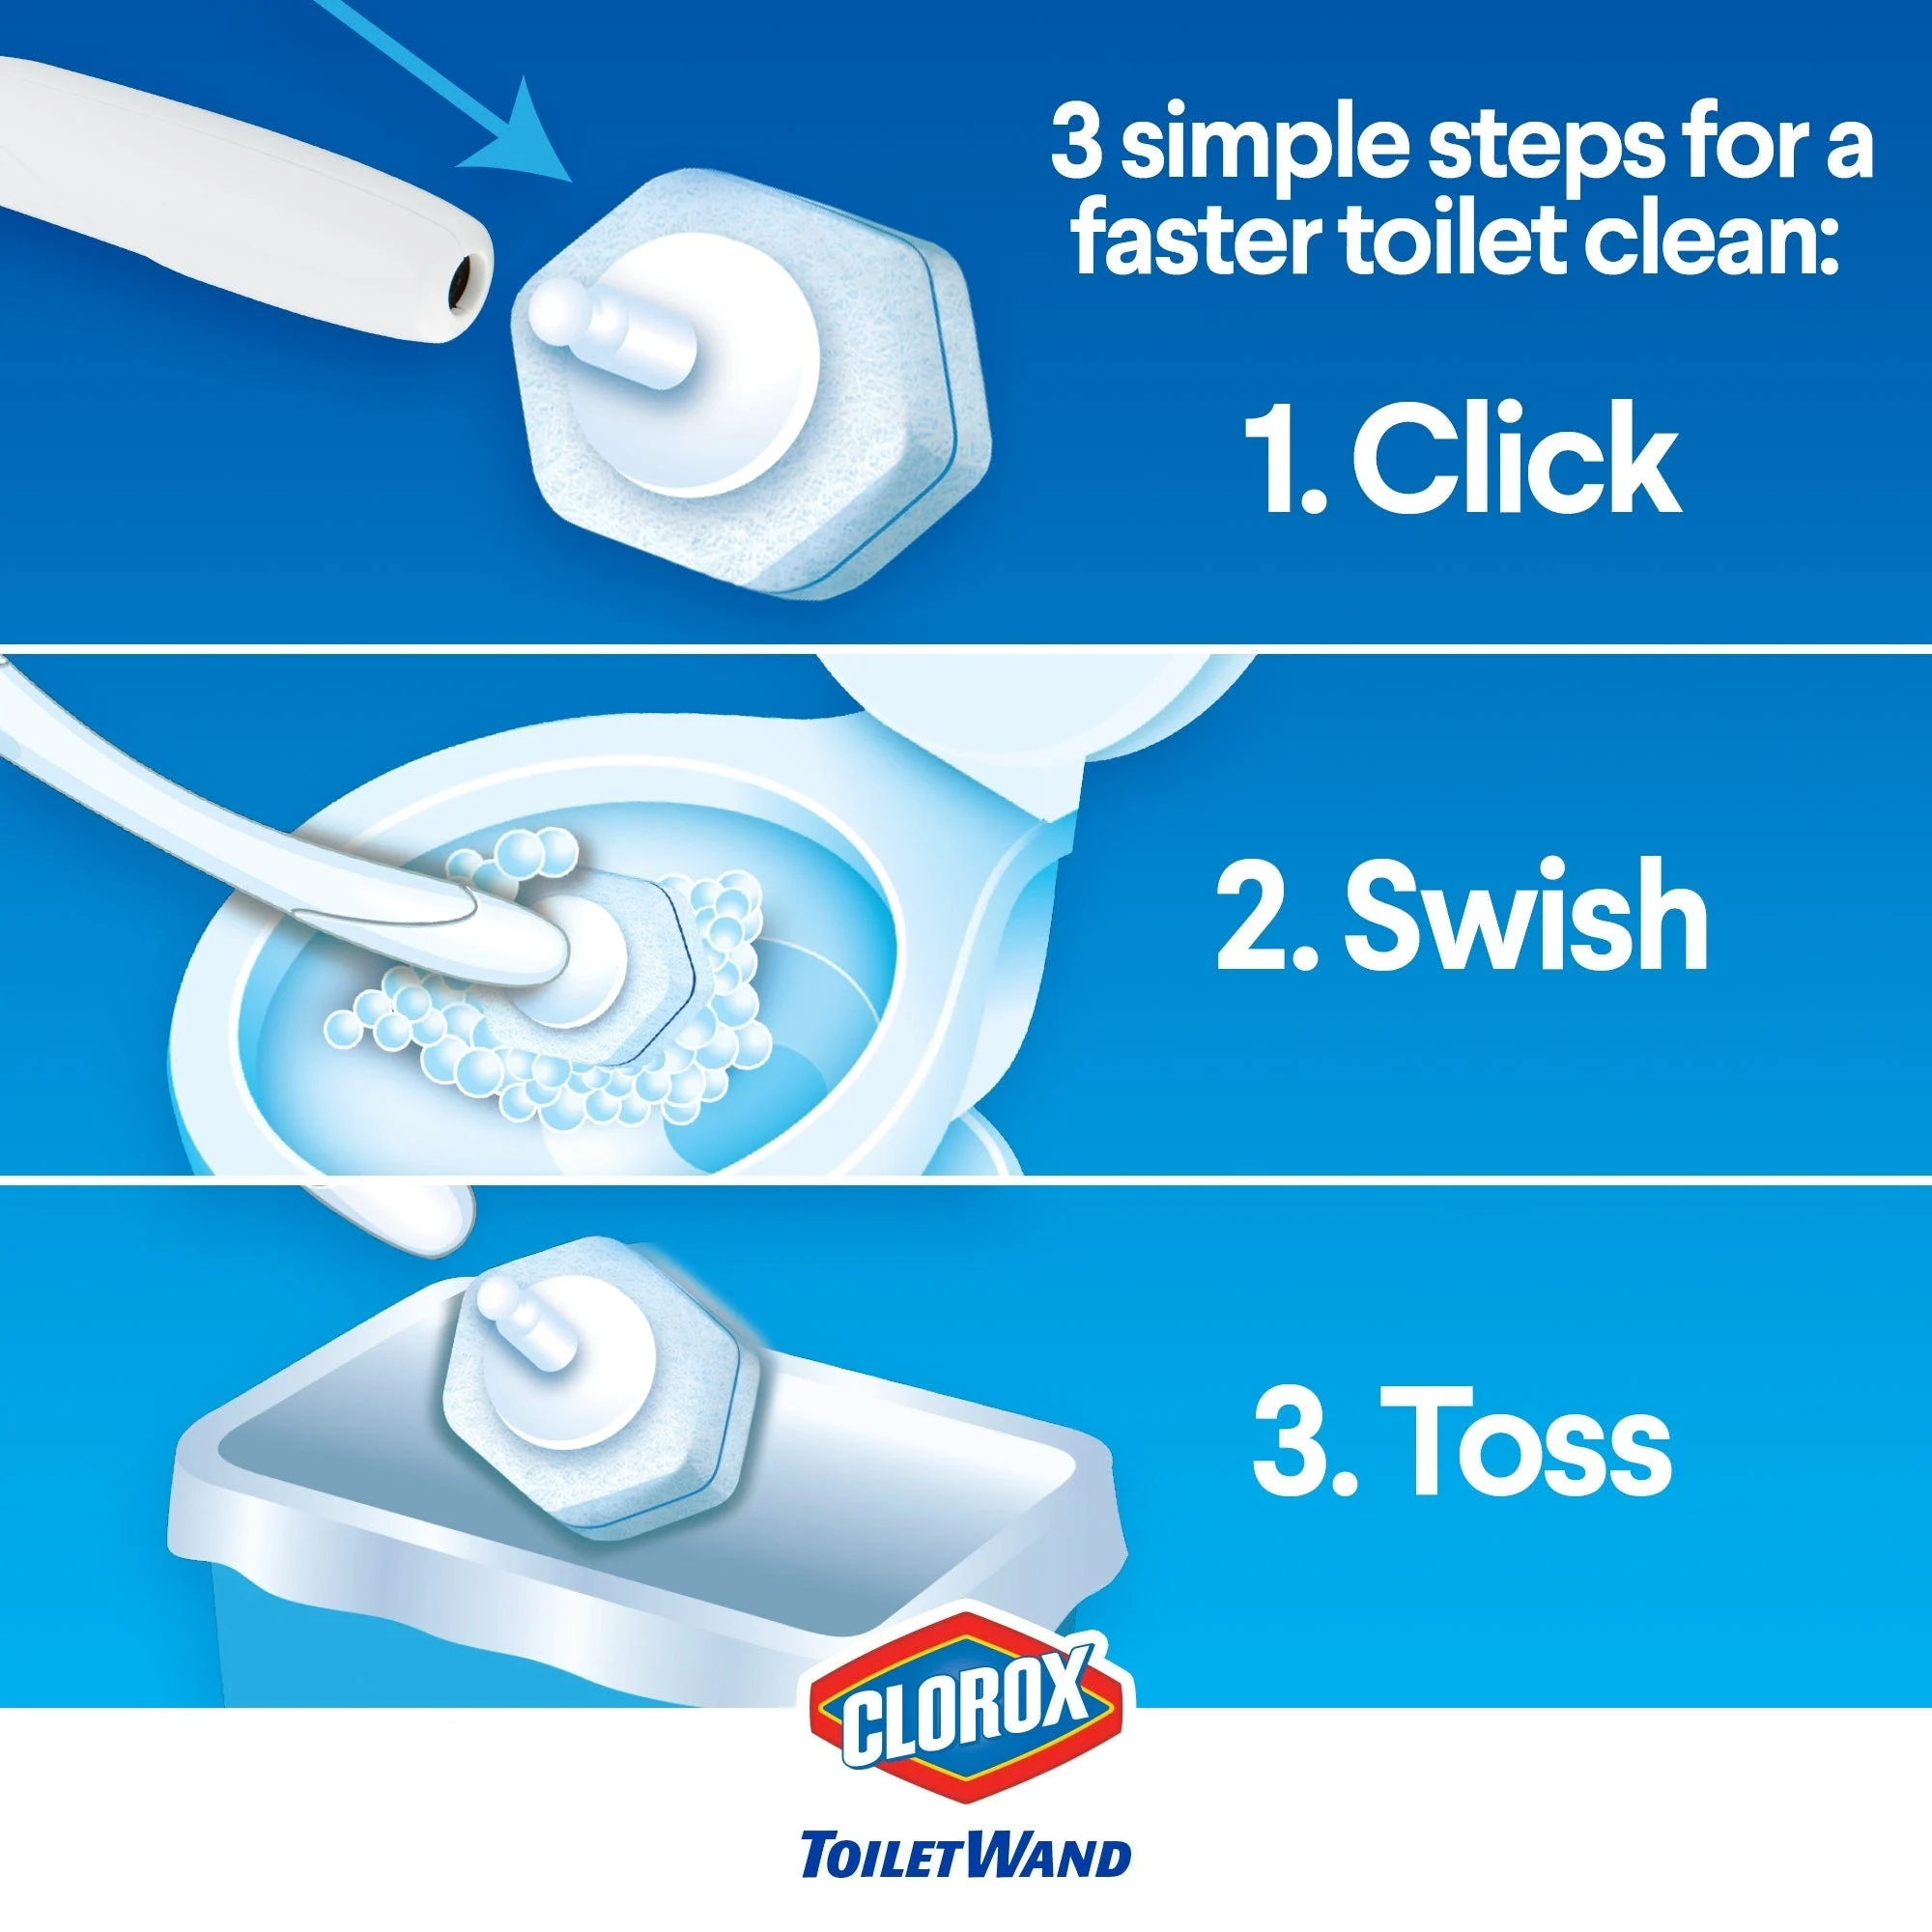 3 steps for a faster toilet clean: click, swish, toss